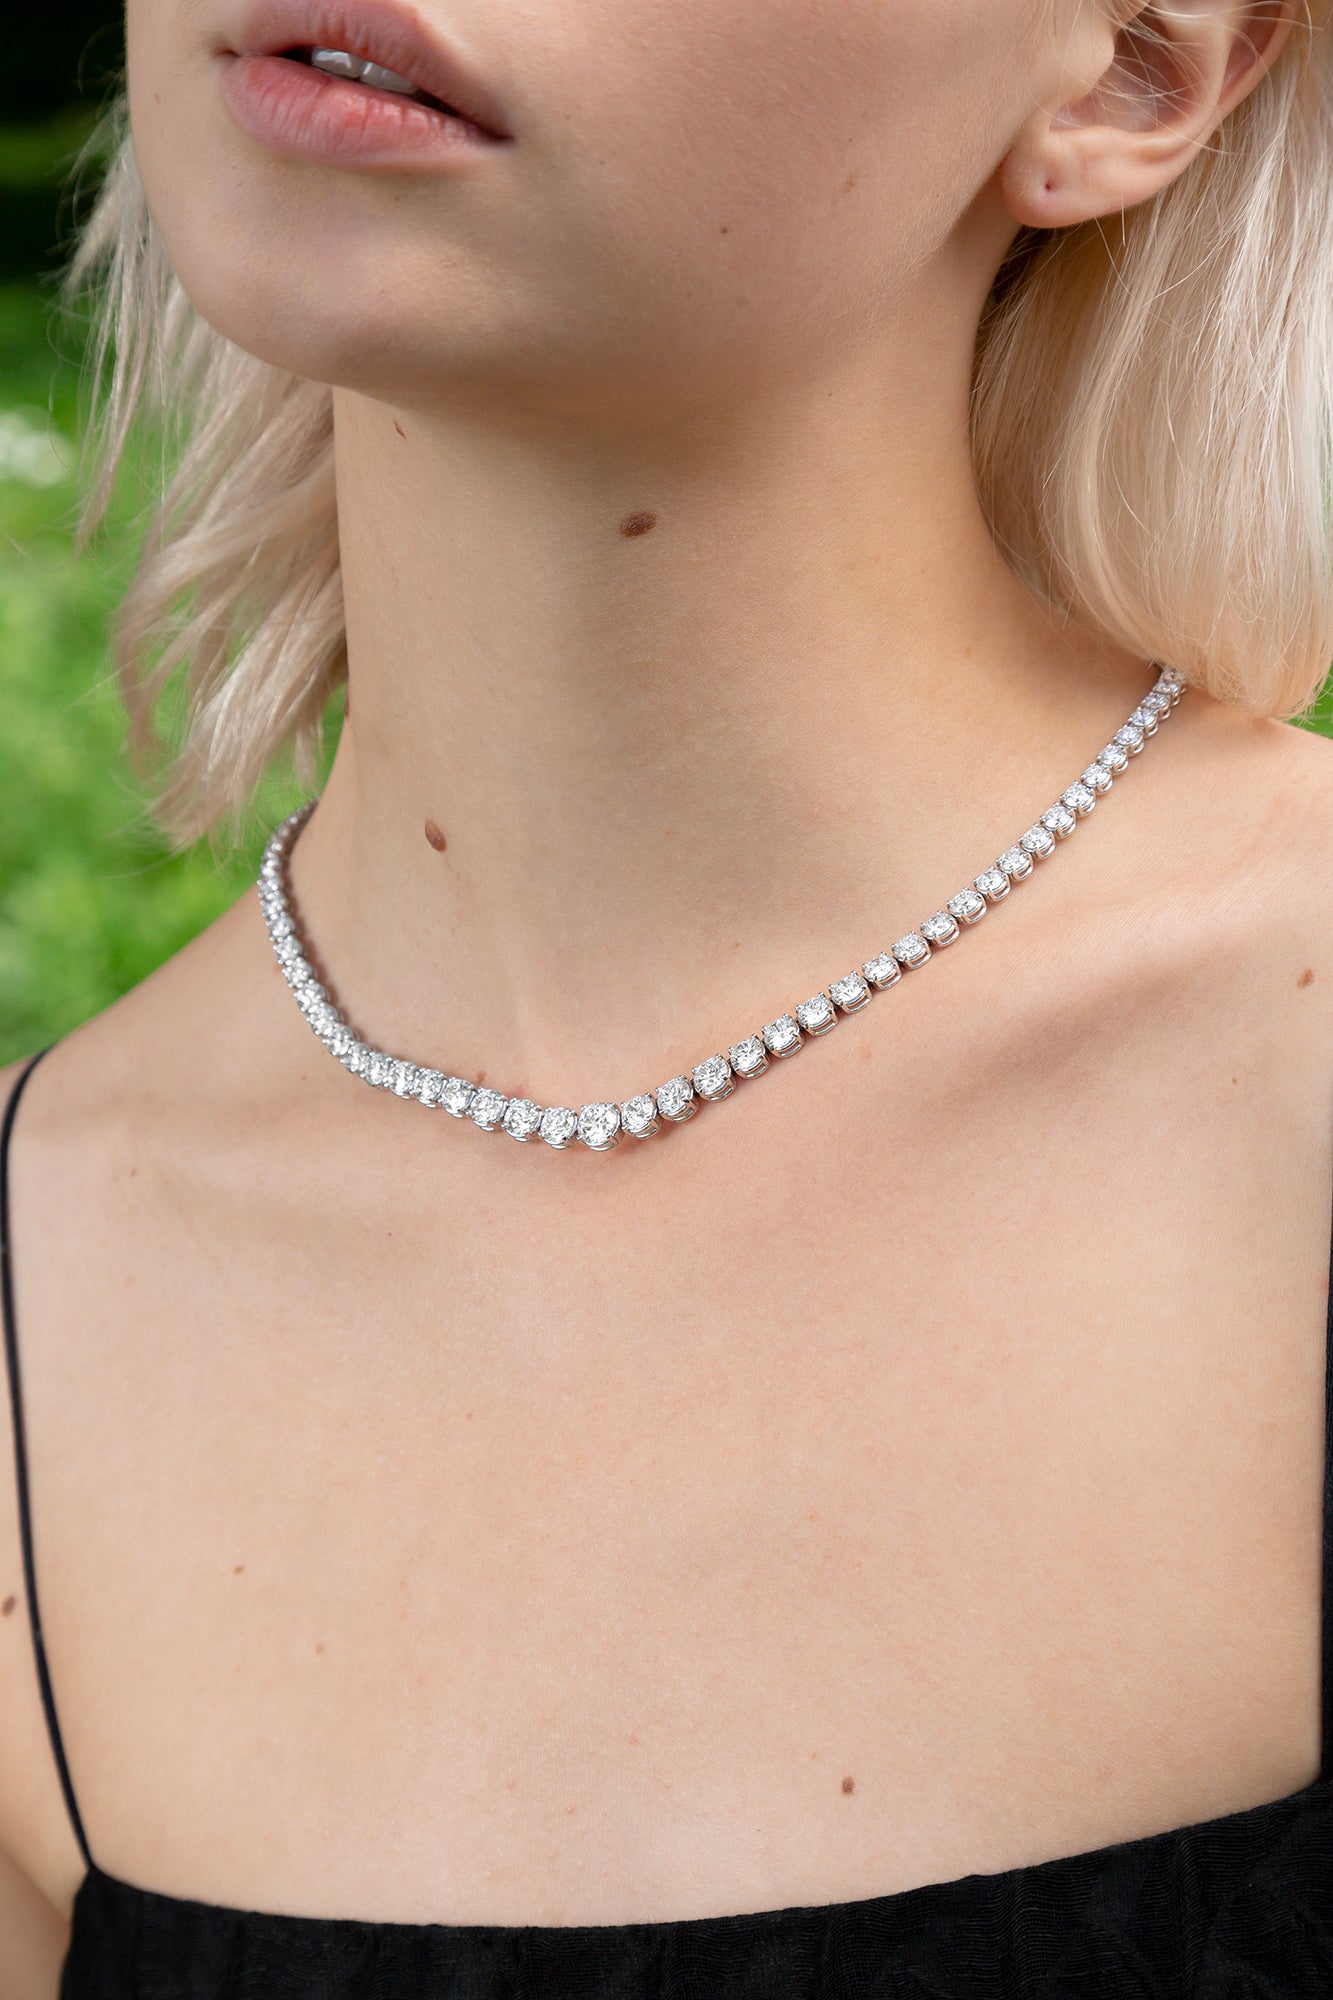 A model wears the Collier Rivière Tennis Necklace as an addition to a springy cocktail look. This 25ct graduated diamond tennis necklace features flawless round brilliants in a four prong solitaire setting. D-color, IF/VVS diamonds crescendo toward a center diamond of 1ct. The length of this striking piece is 16 inches (40cm).